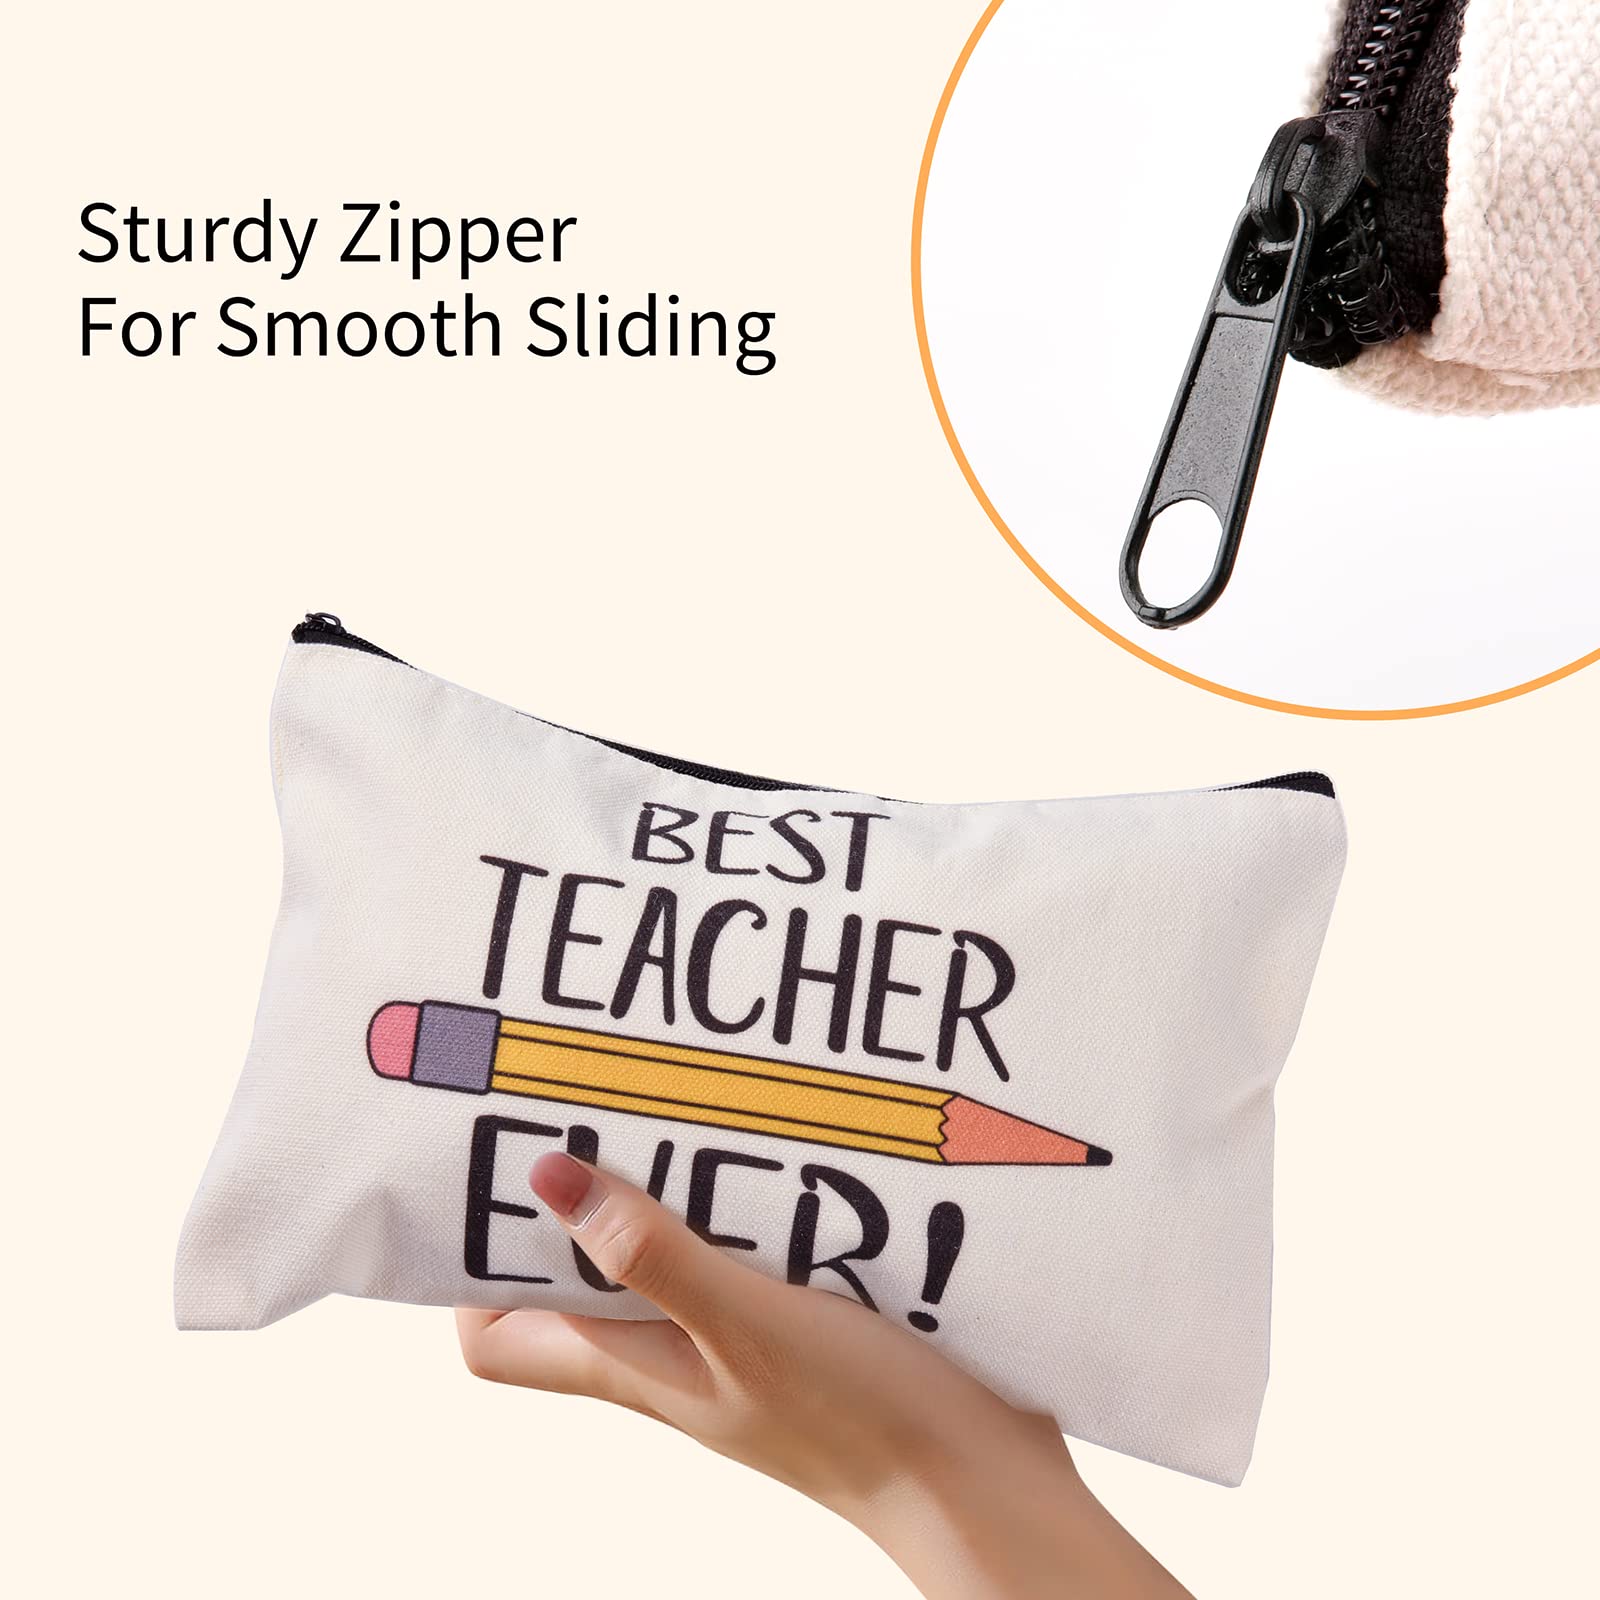 8 PCS Teacher Gifts Makeup Bags Cosmetic Travel Carrying Case Toiletry Pouch with Zipper in 2 Unique Designs, Graduation Teacher Appreciation Gifts